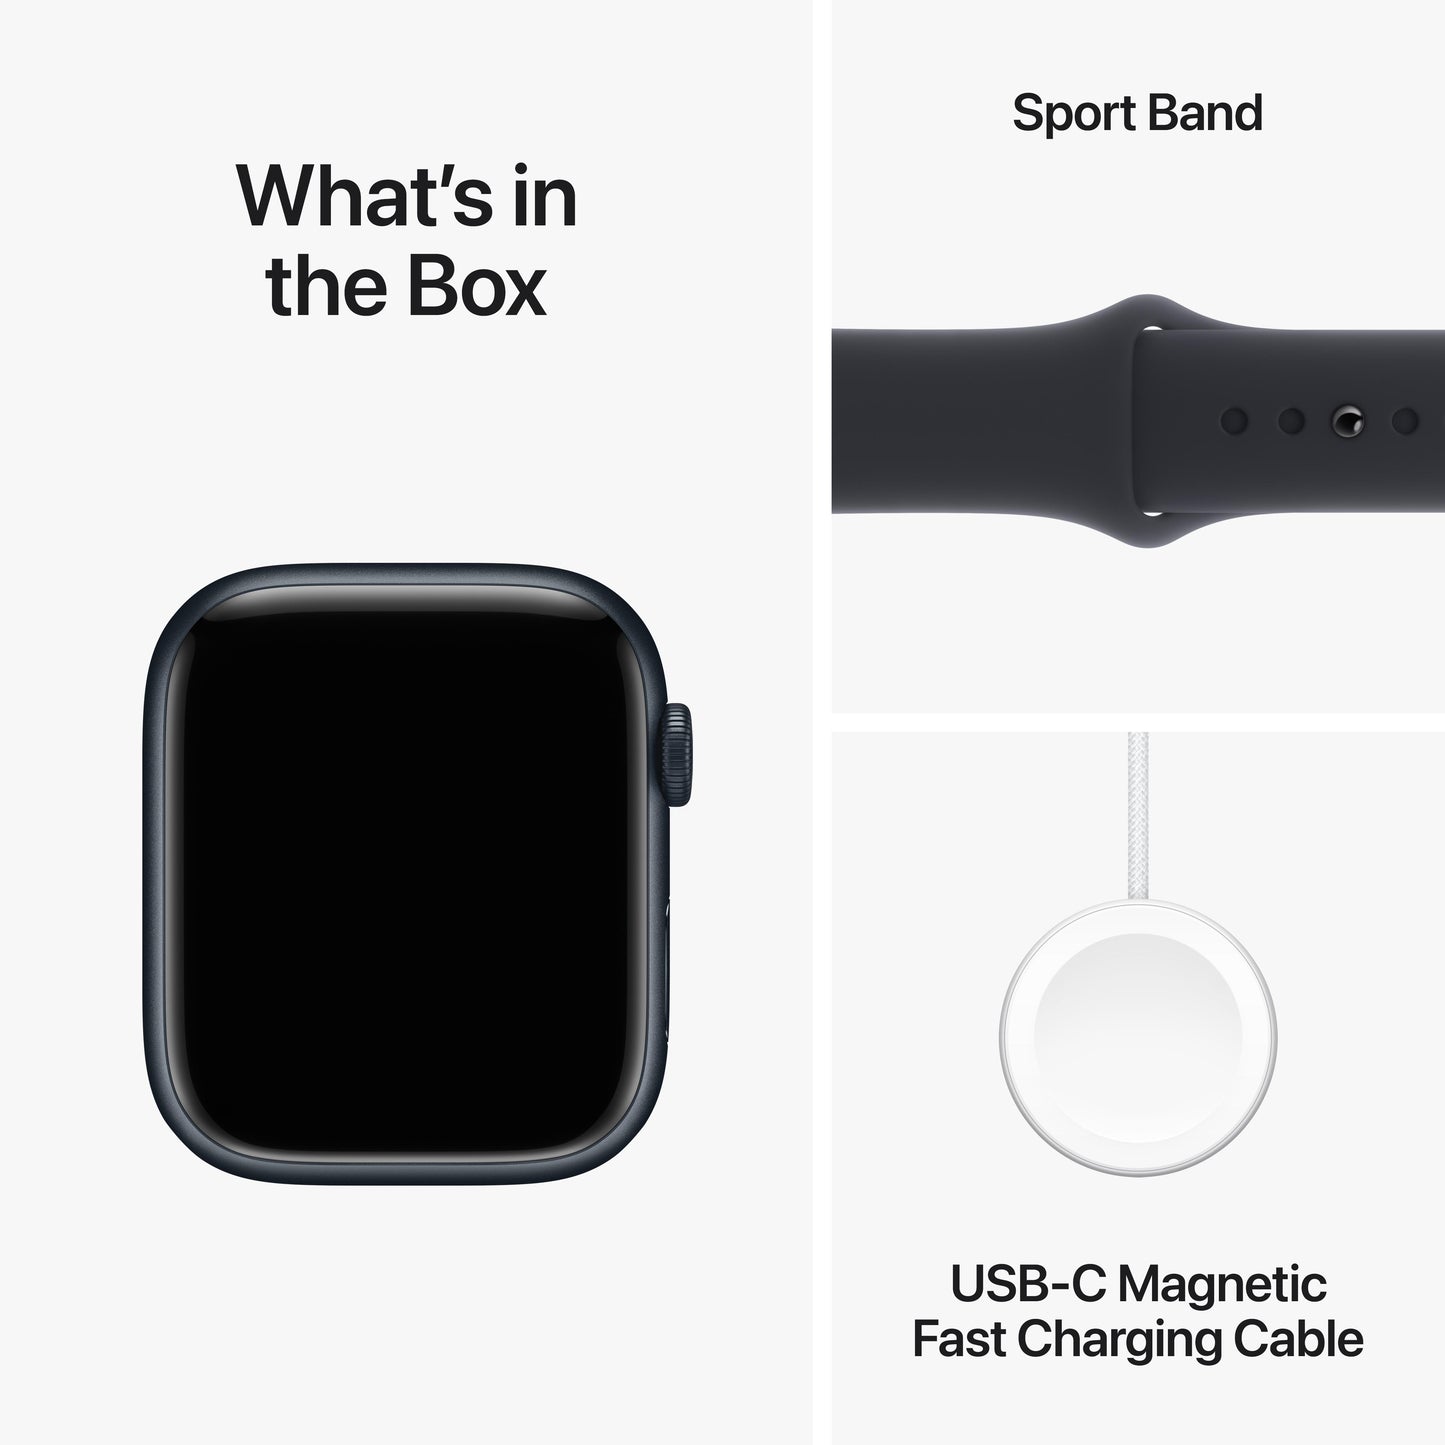 Apple Watch Series 9 GPS 45mm Midnight Aluminum Case with Midnight Sport Band - M/L